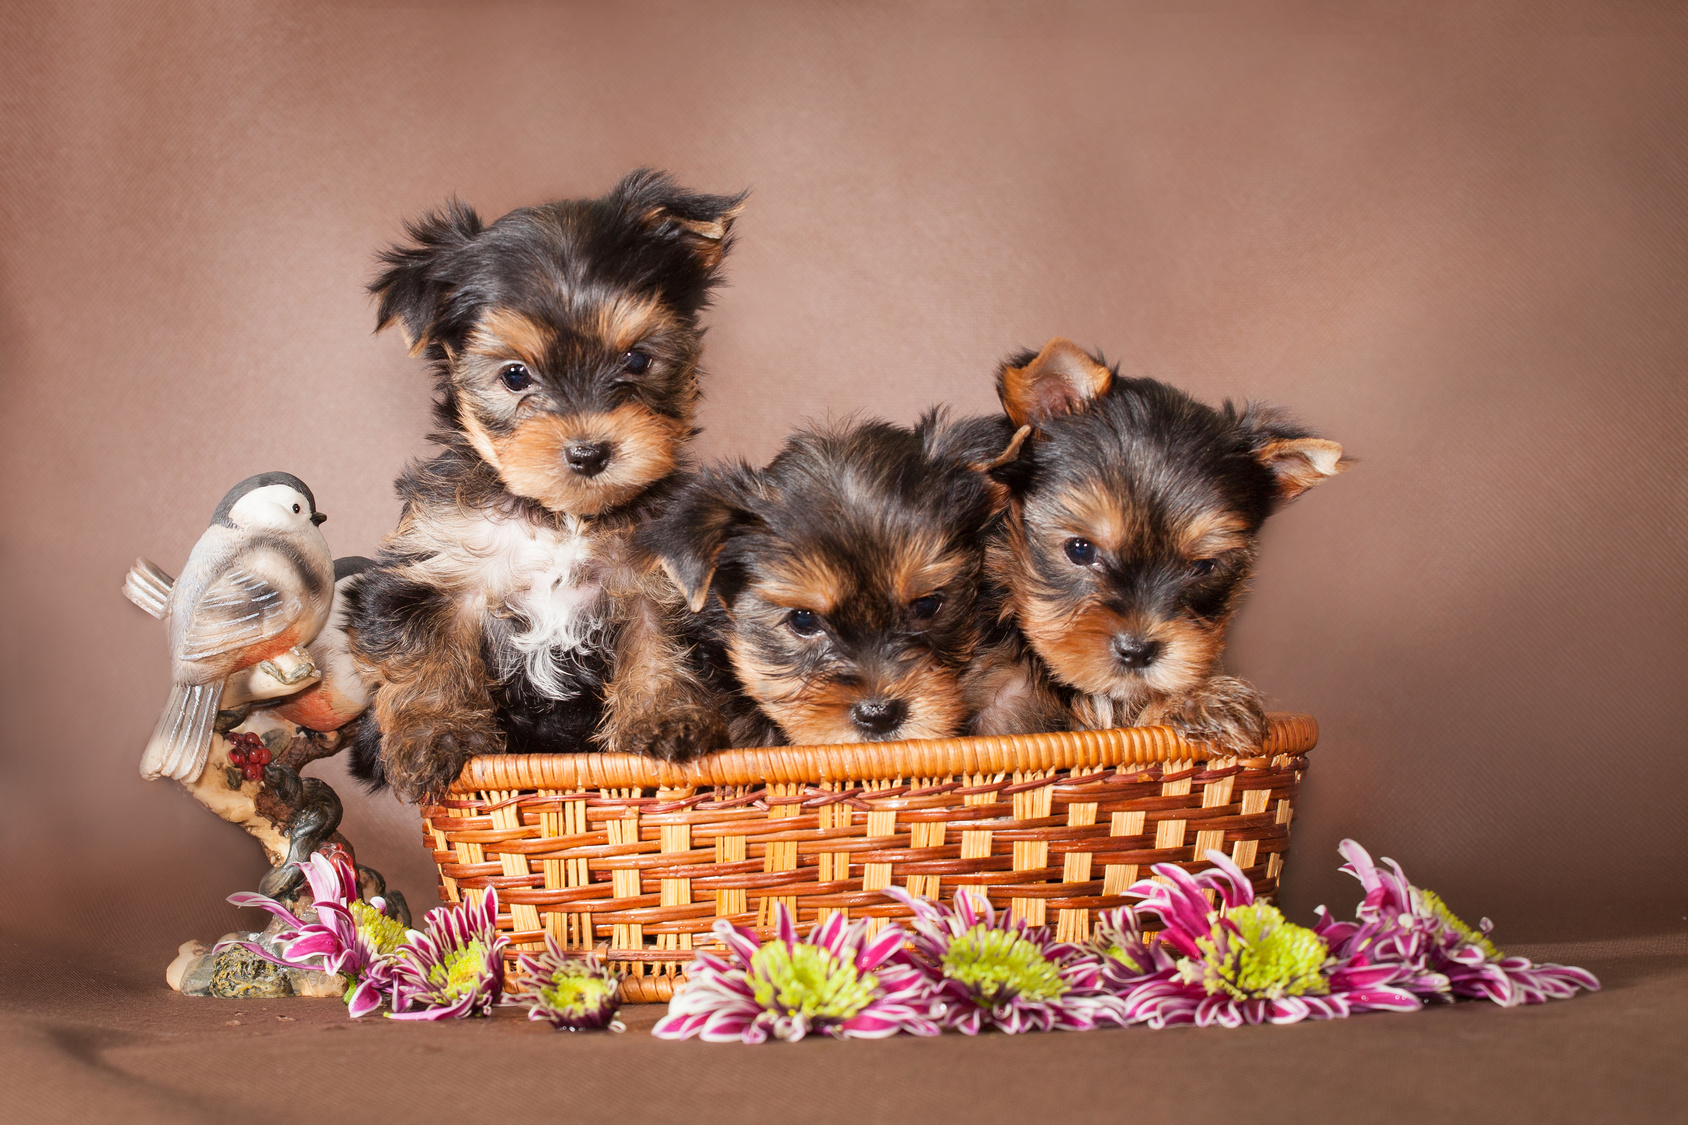 Rainbow creek kennels, yorkies, dog, breeder, rainbow-creek, dog-breeder, south butler, ny, new york, for, sale, puppies, puppy, pups, inspected, insp